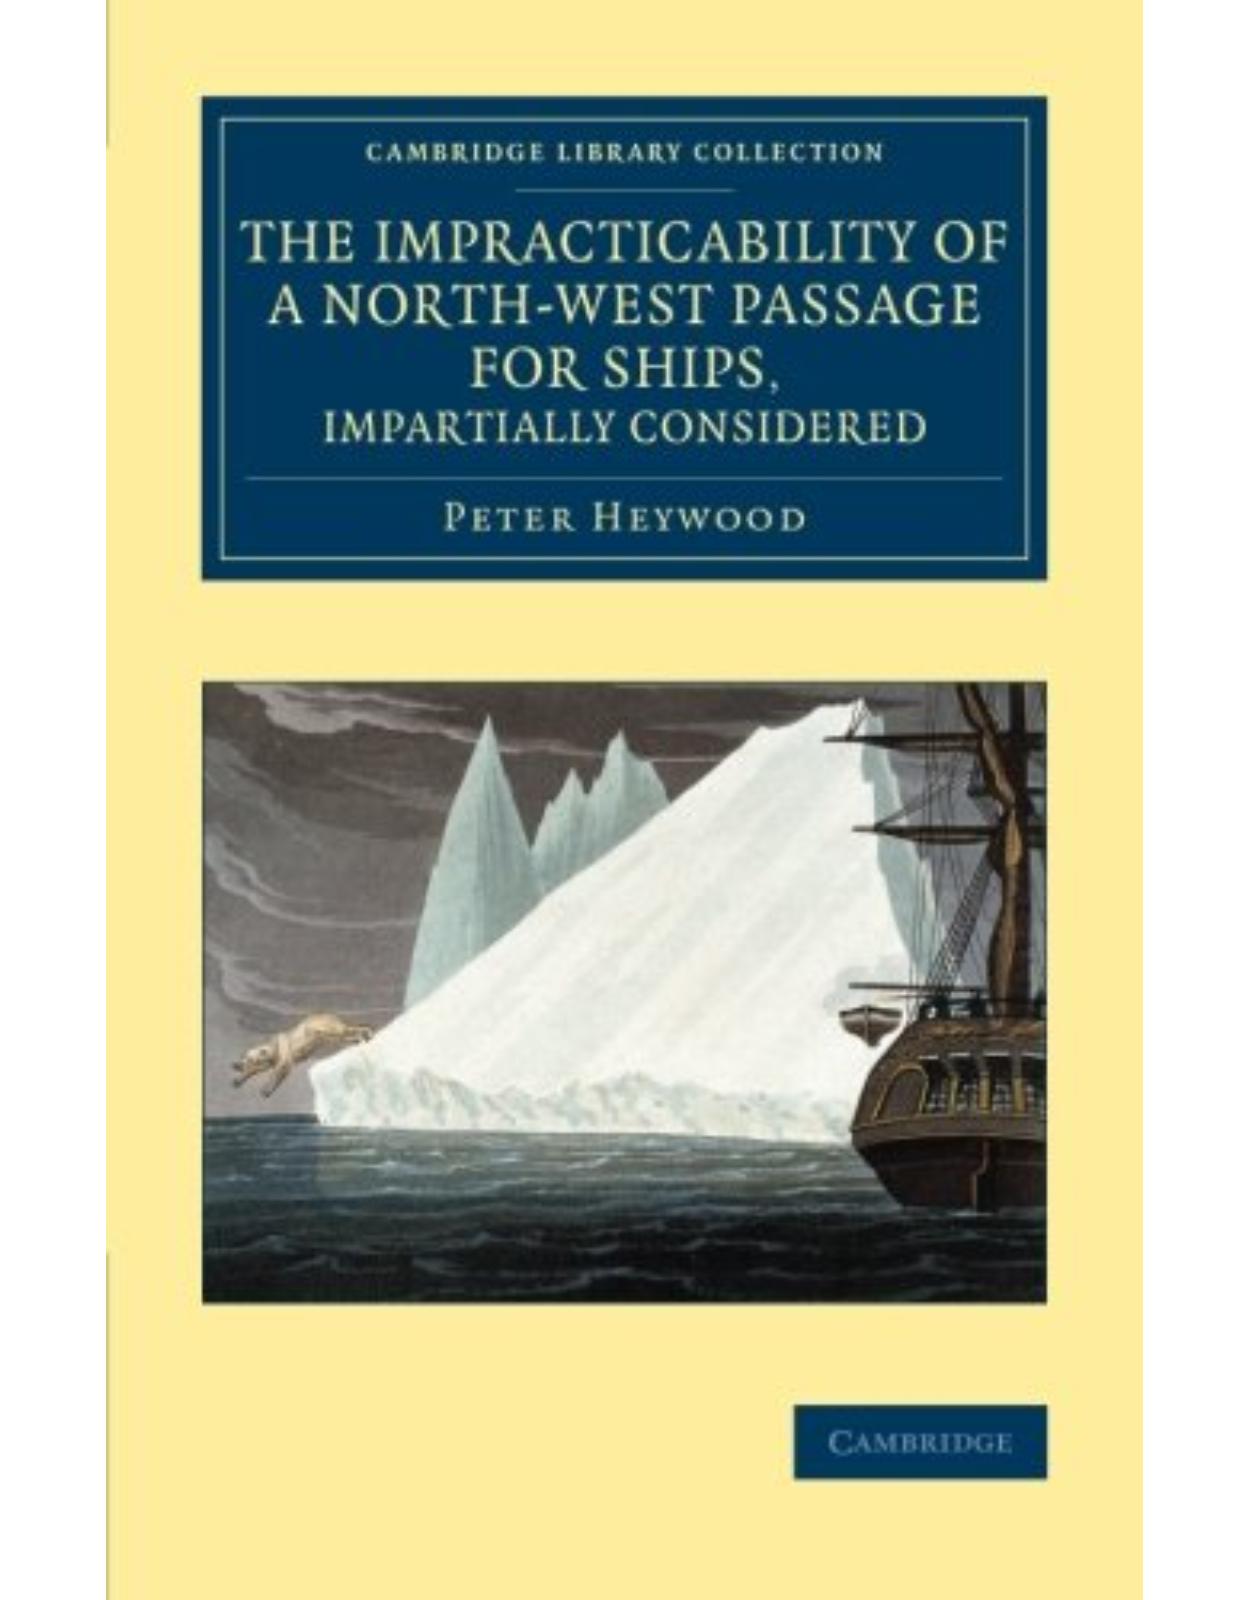 The Impracticability of a North-West Passage for Ships, Impartially Considered (Cambridge Library Collection - Polar Exploration)